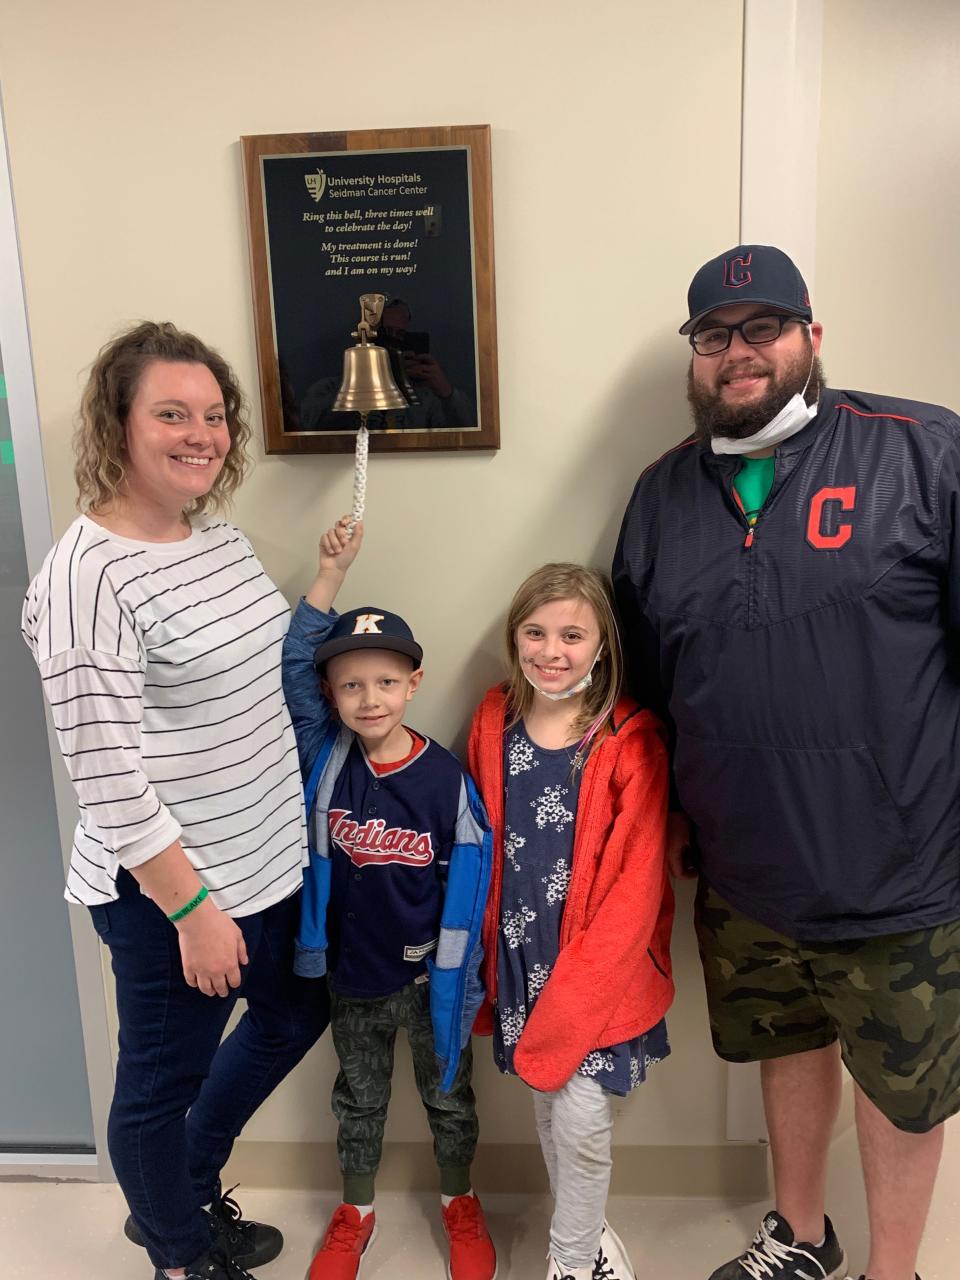 Blake Michel rings the bell at his last radiation treatment at University Hospitals Rainbow Babies & Children's in Cleveland. He completed 28 treatments. He is shown with his mom Morgan Michel, left, sister Ryleigh Michel and dad Jacob Michel.